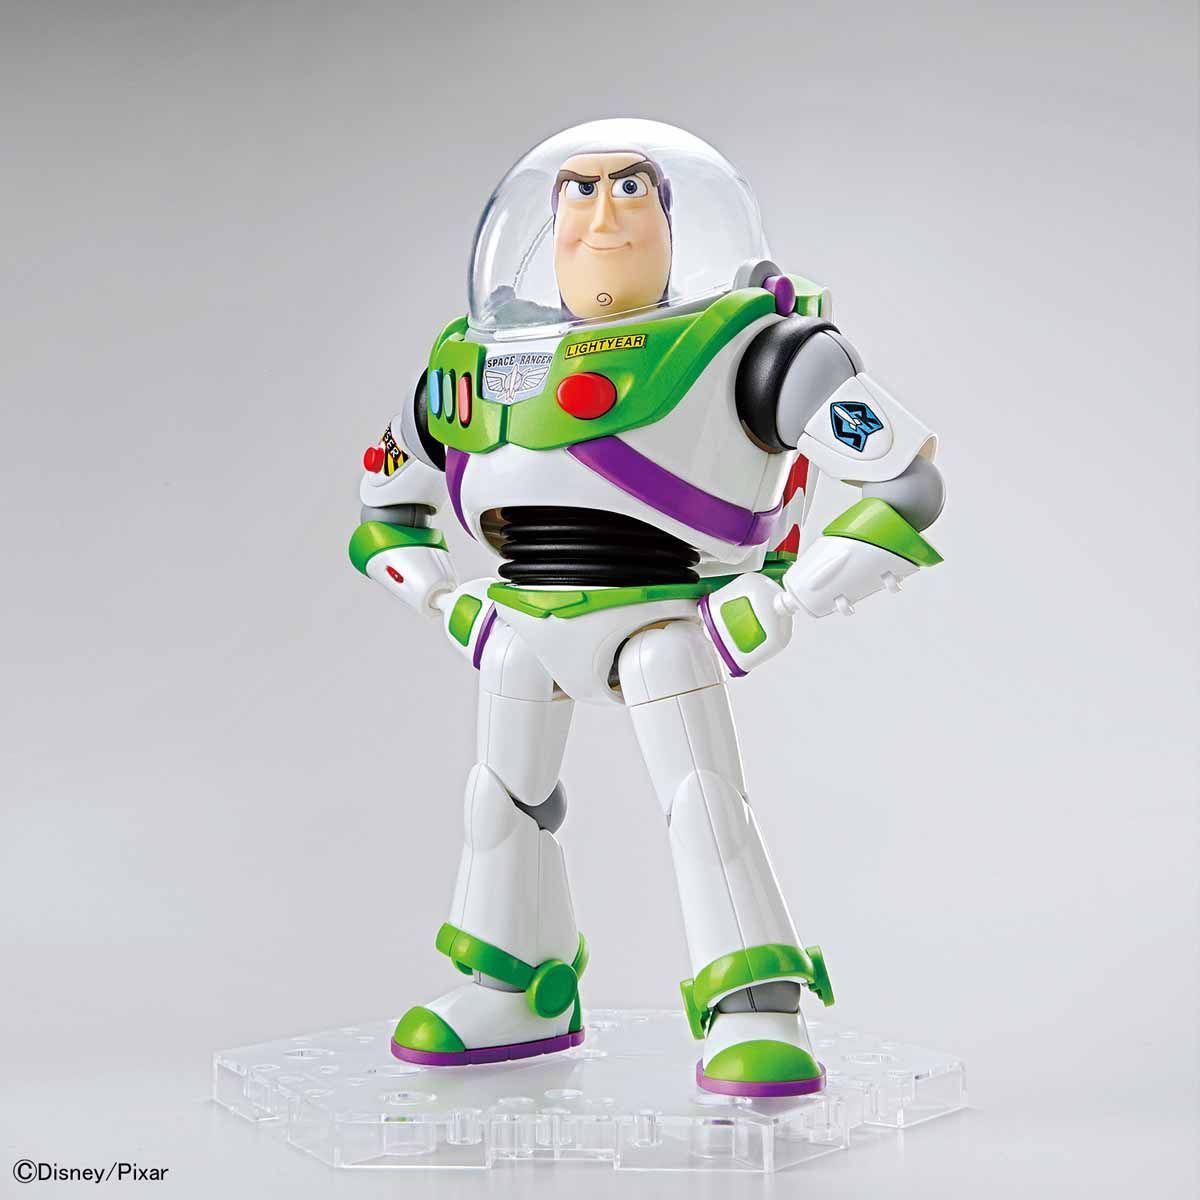 BANDAI 5057698 Toy Story 4 Buzz Lightyear Action Figure